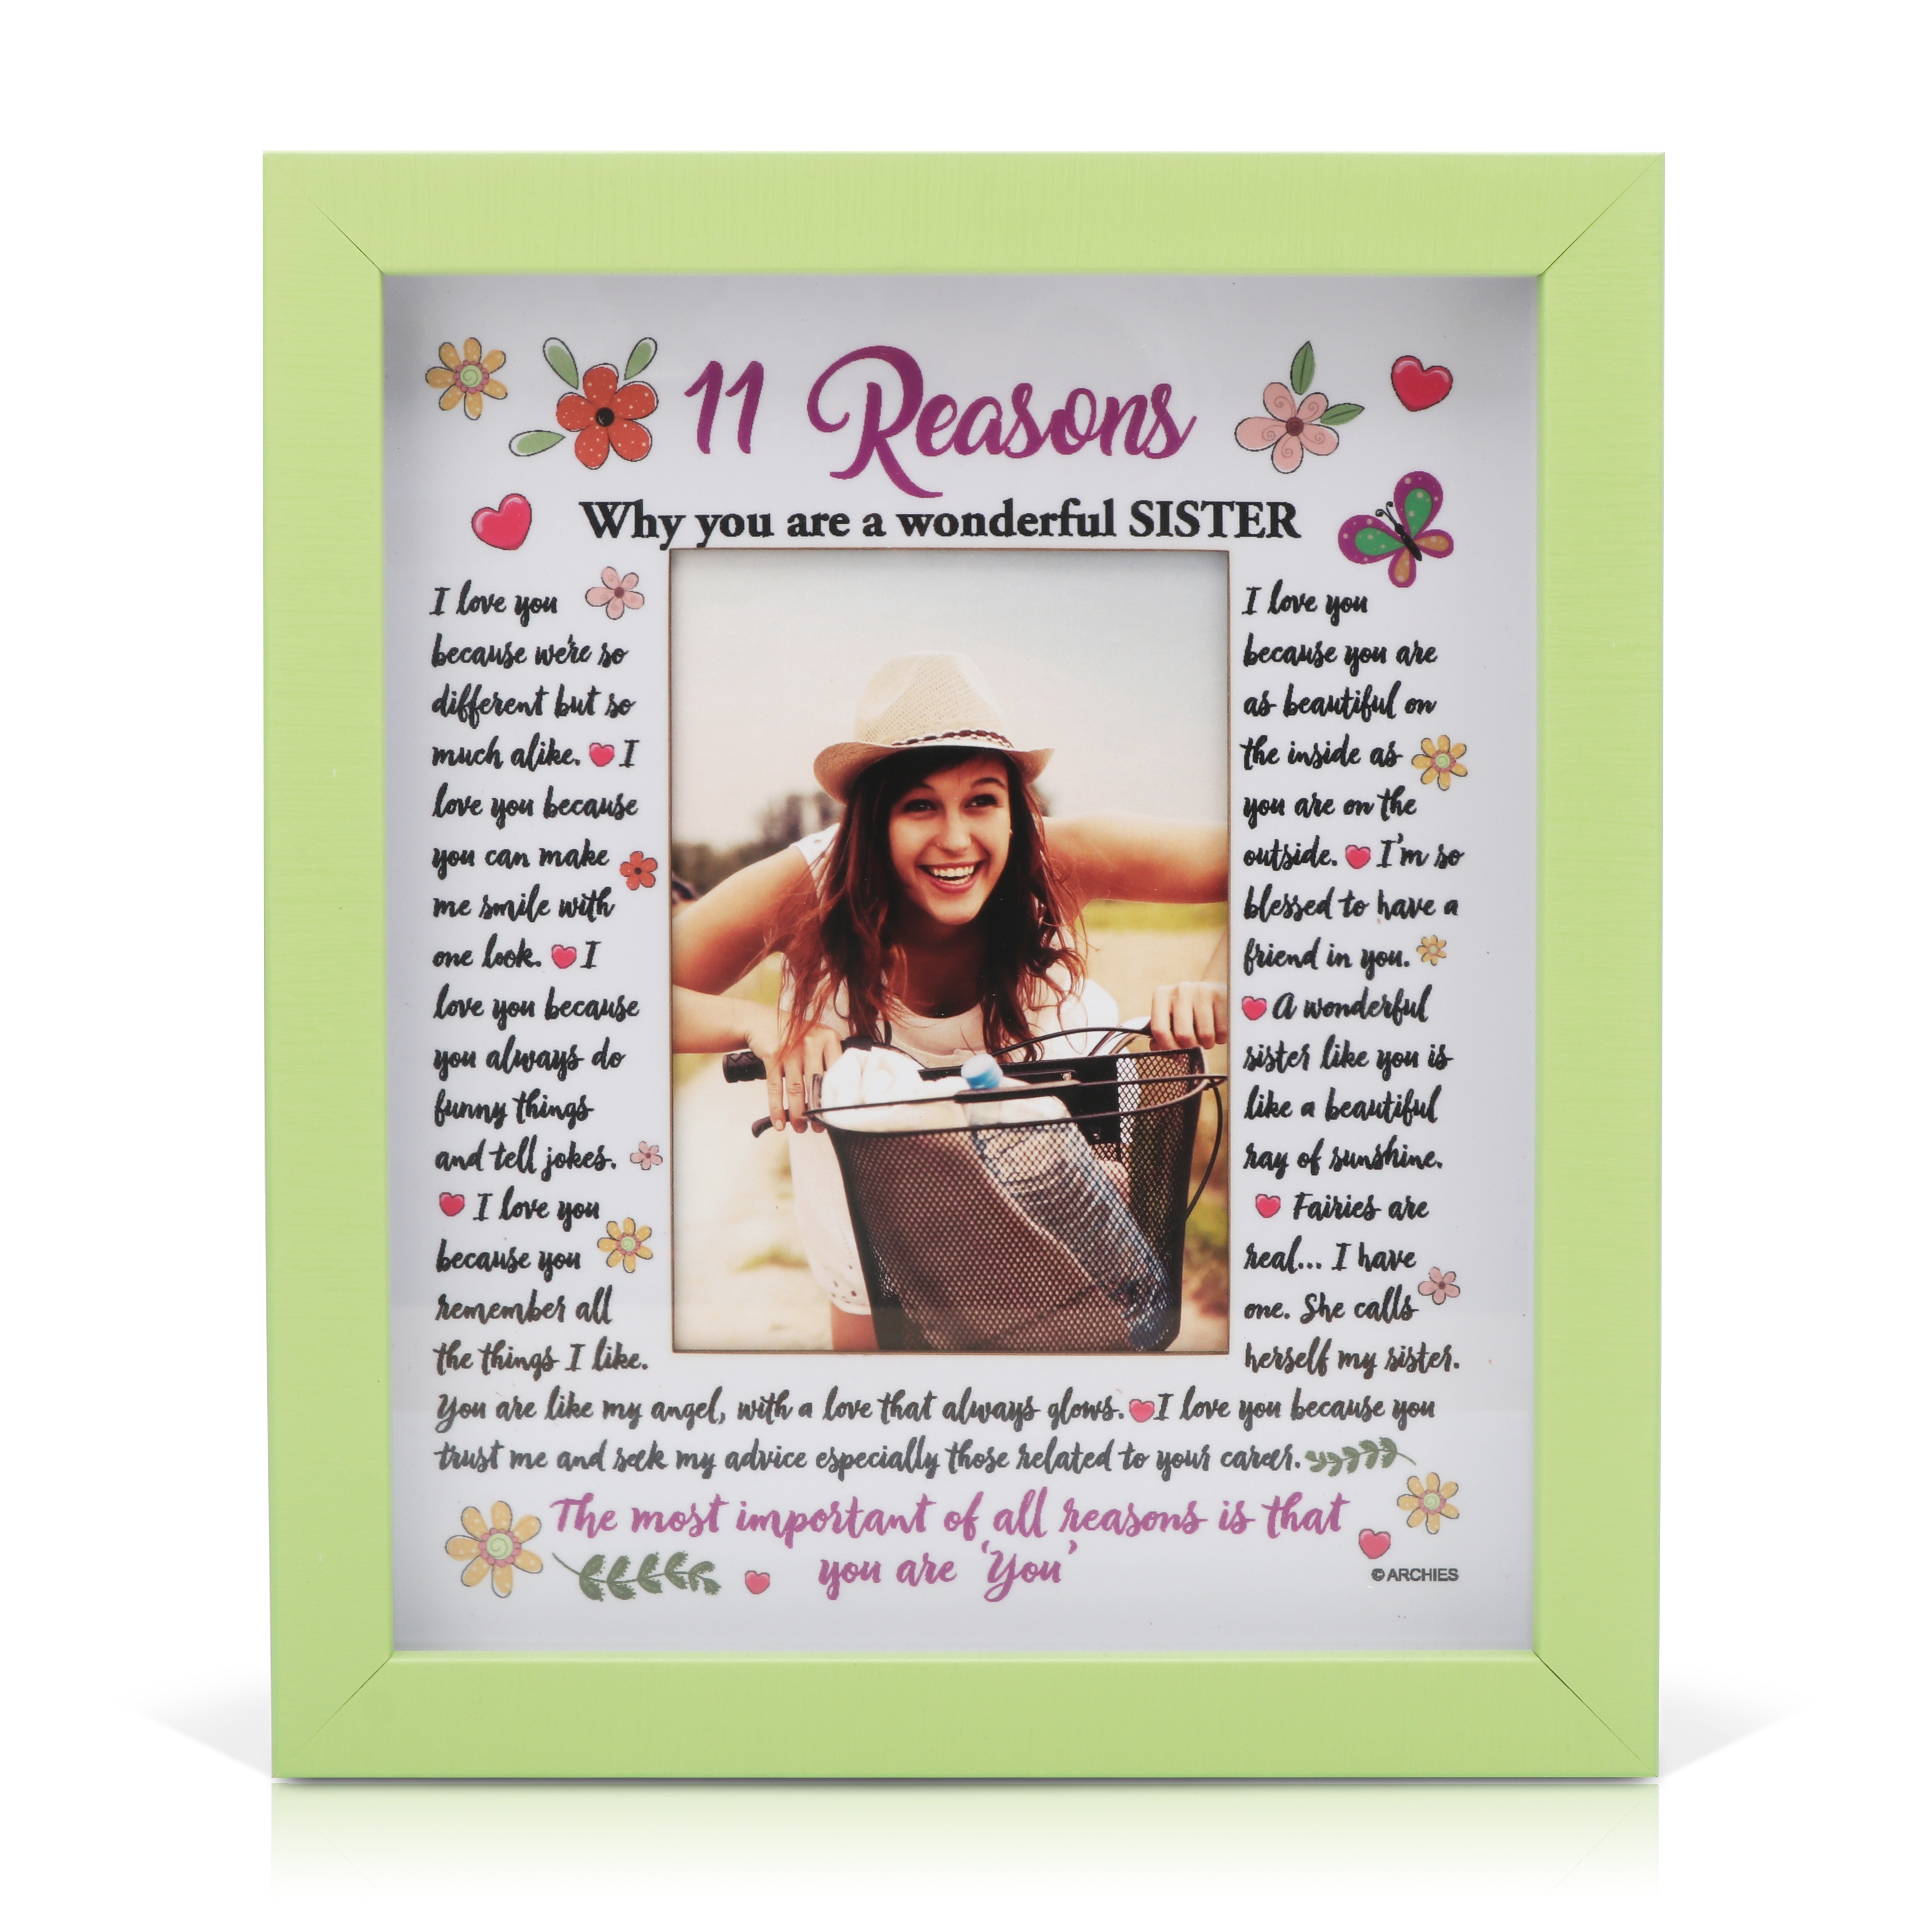 Archies | Archies Wooden Photo Frame for Wonderful Sister